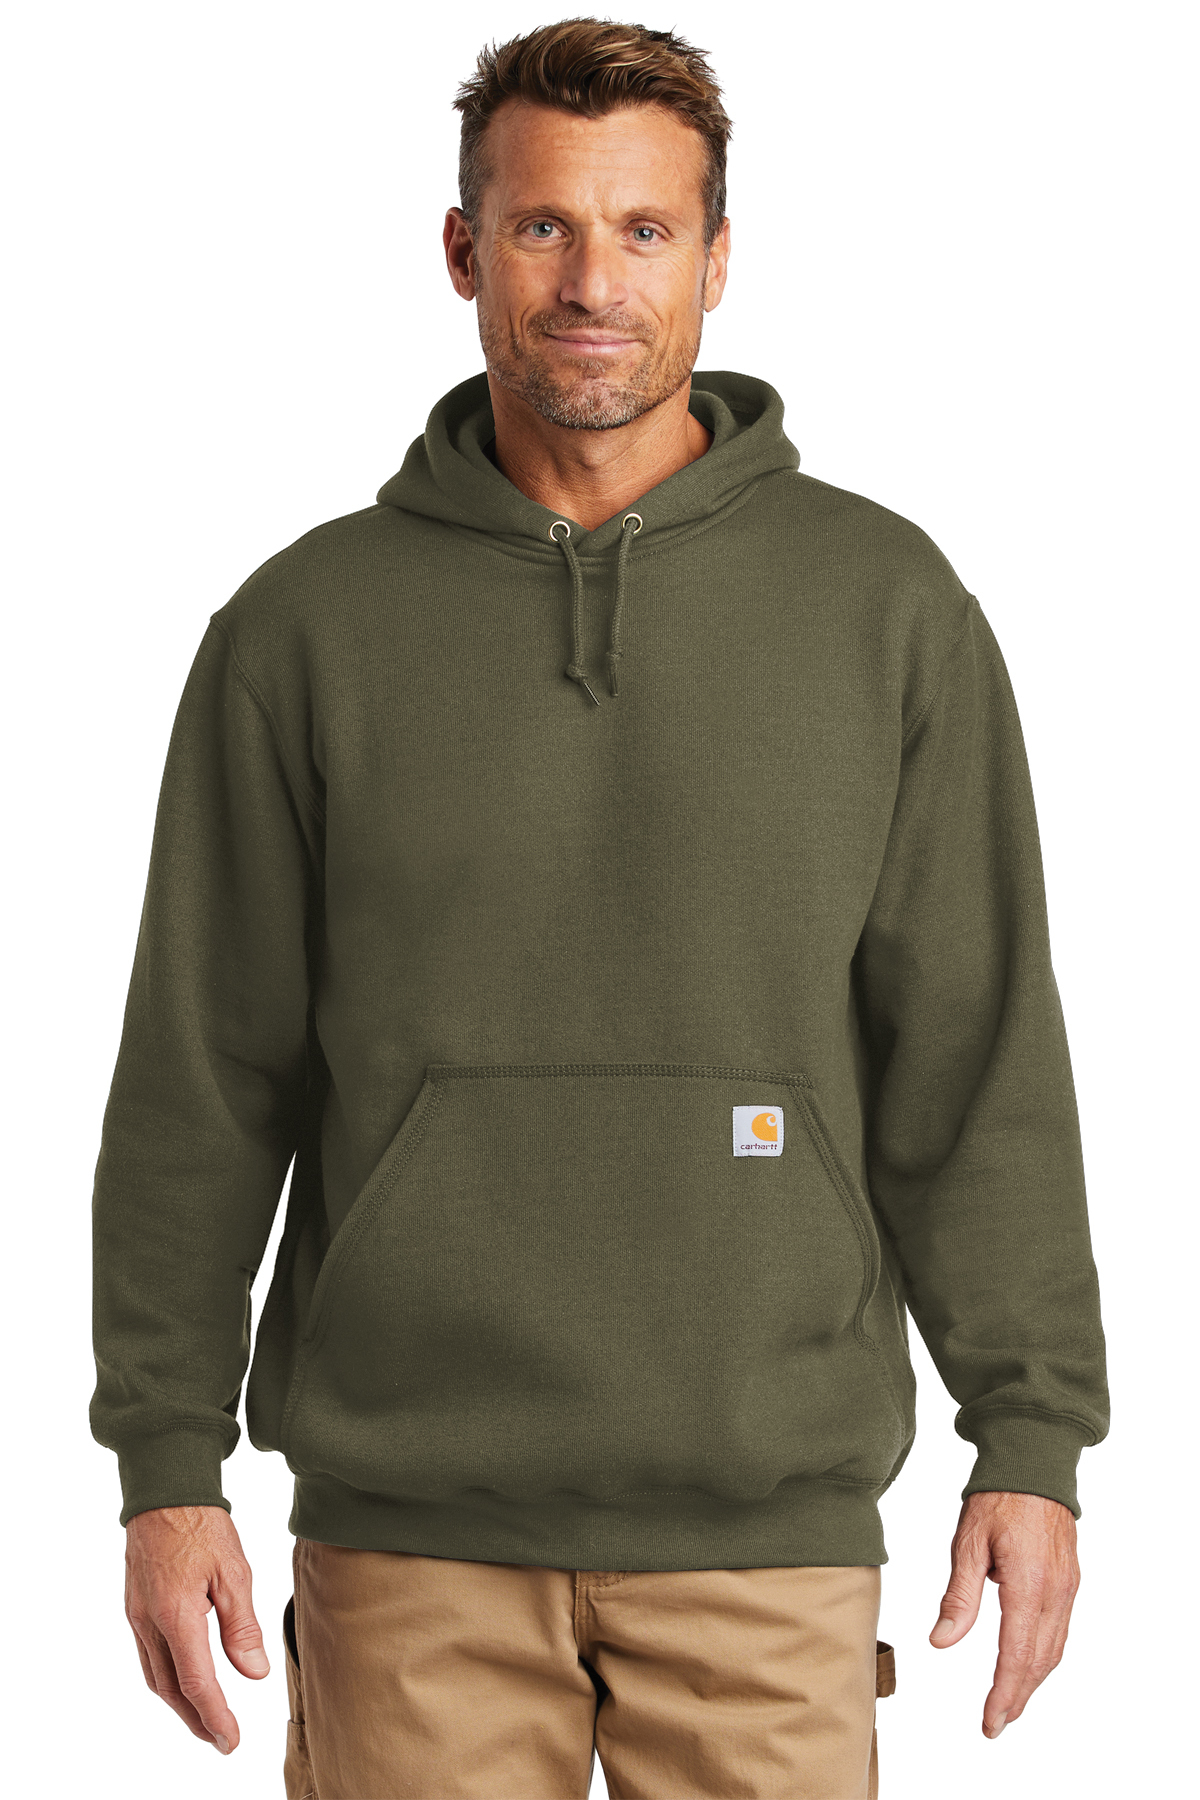 Carhartt WIP Clothing, T-Shirts, Hoodies, Sweats and More